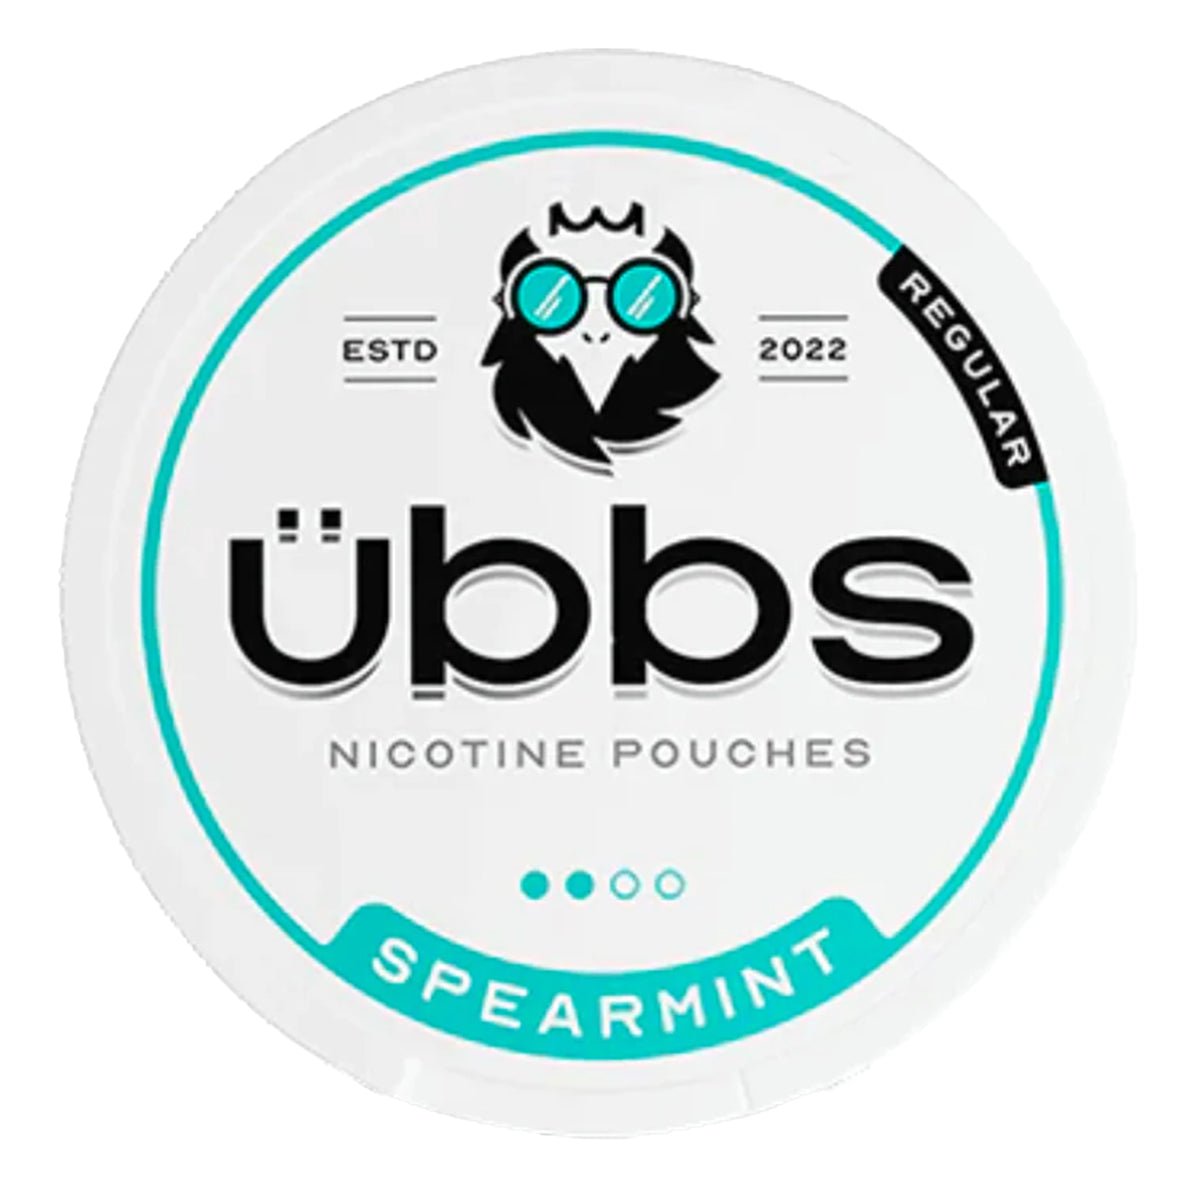 Spearmint Nicotine Pouches By Ubbs - Prime Vapes UK